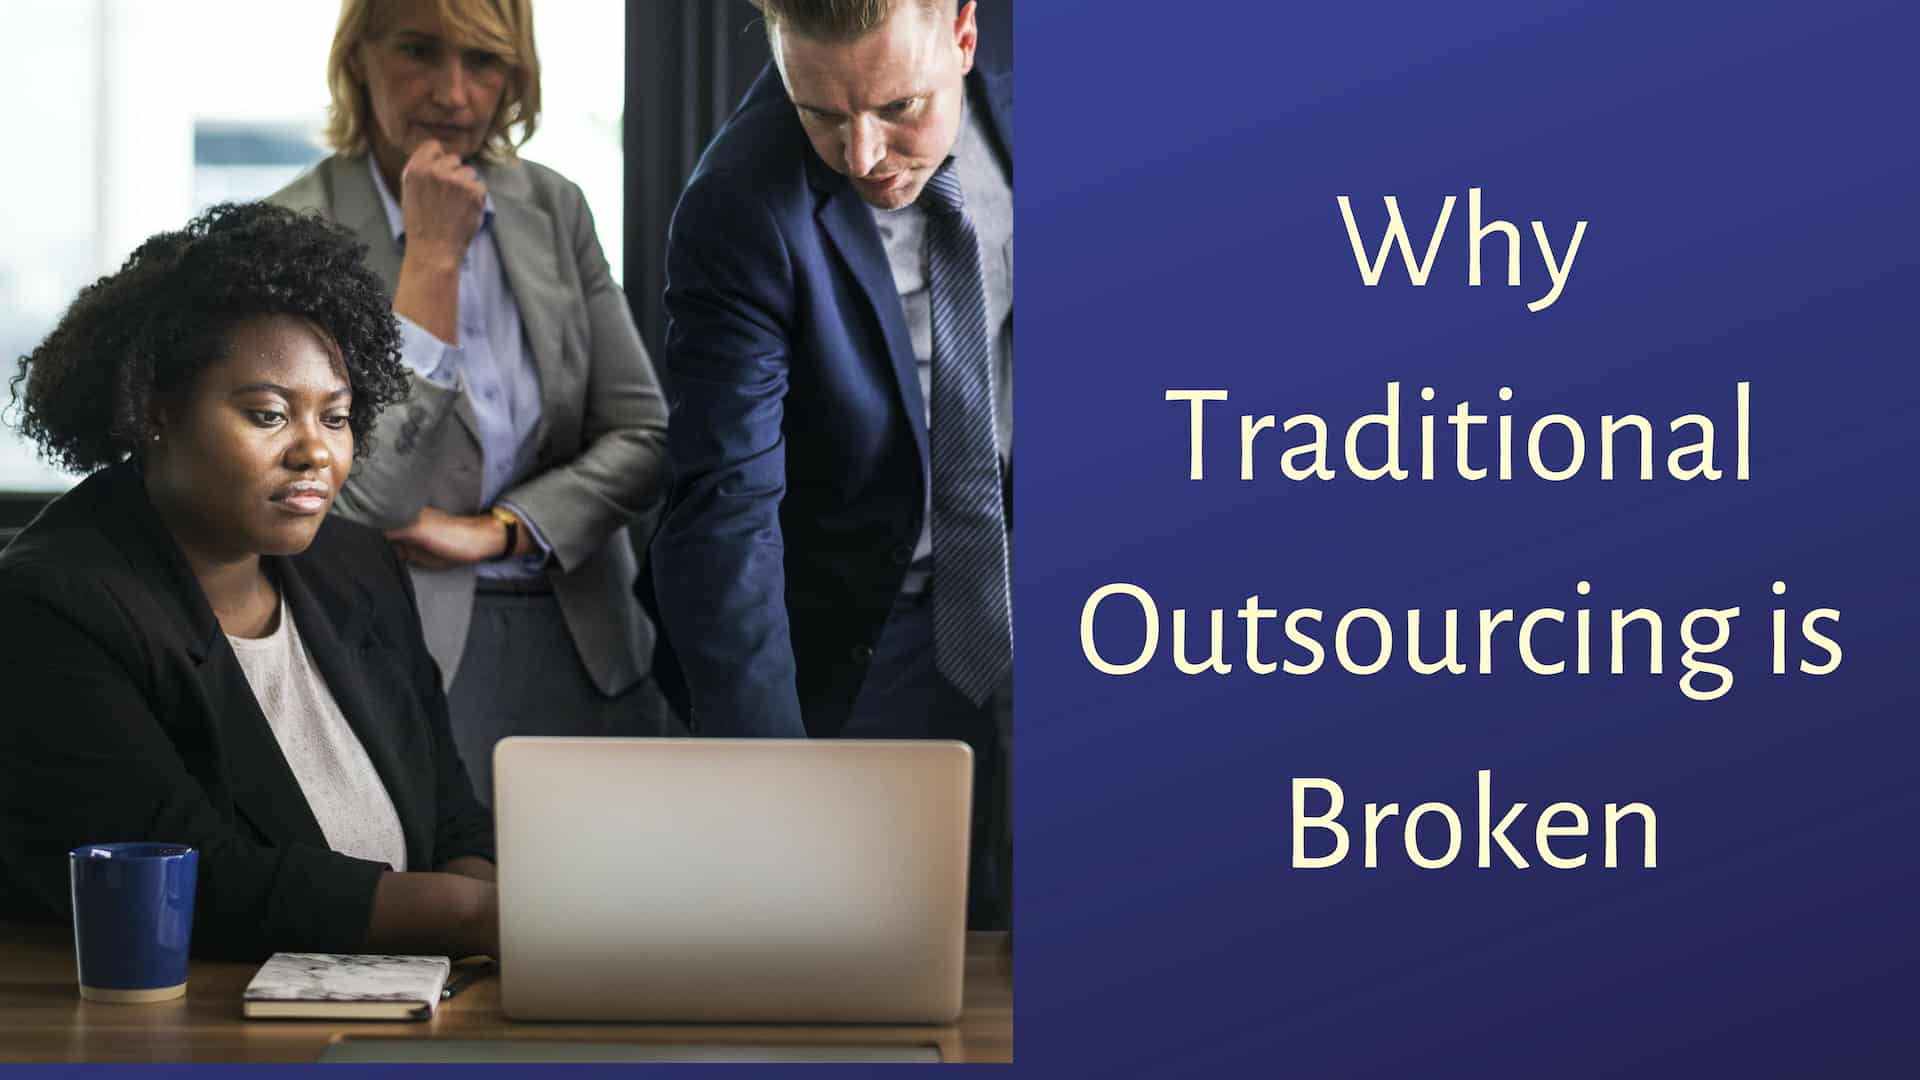 Why Traditional Outsourcing Is Broken